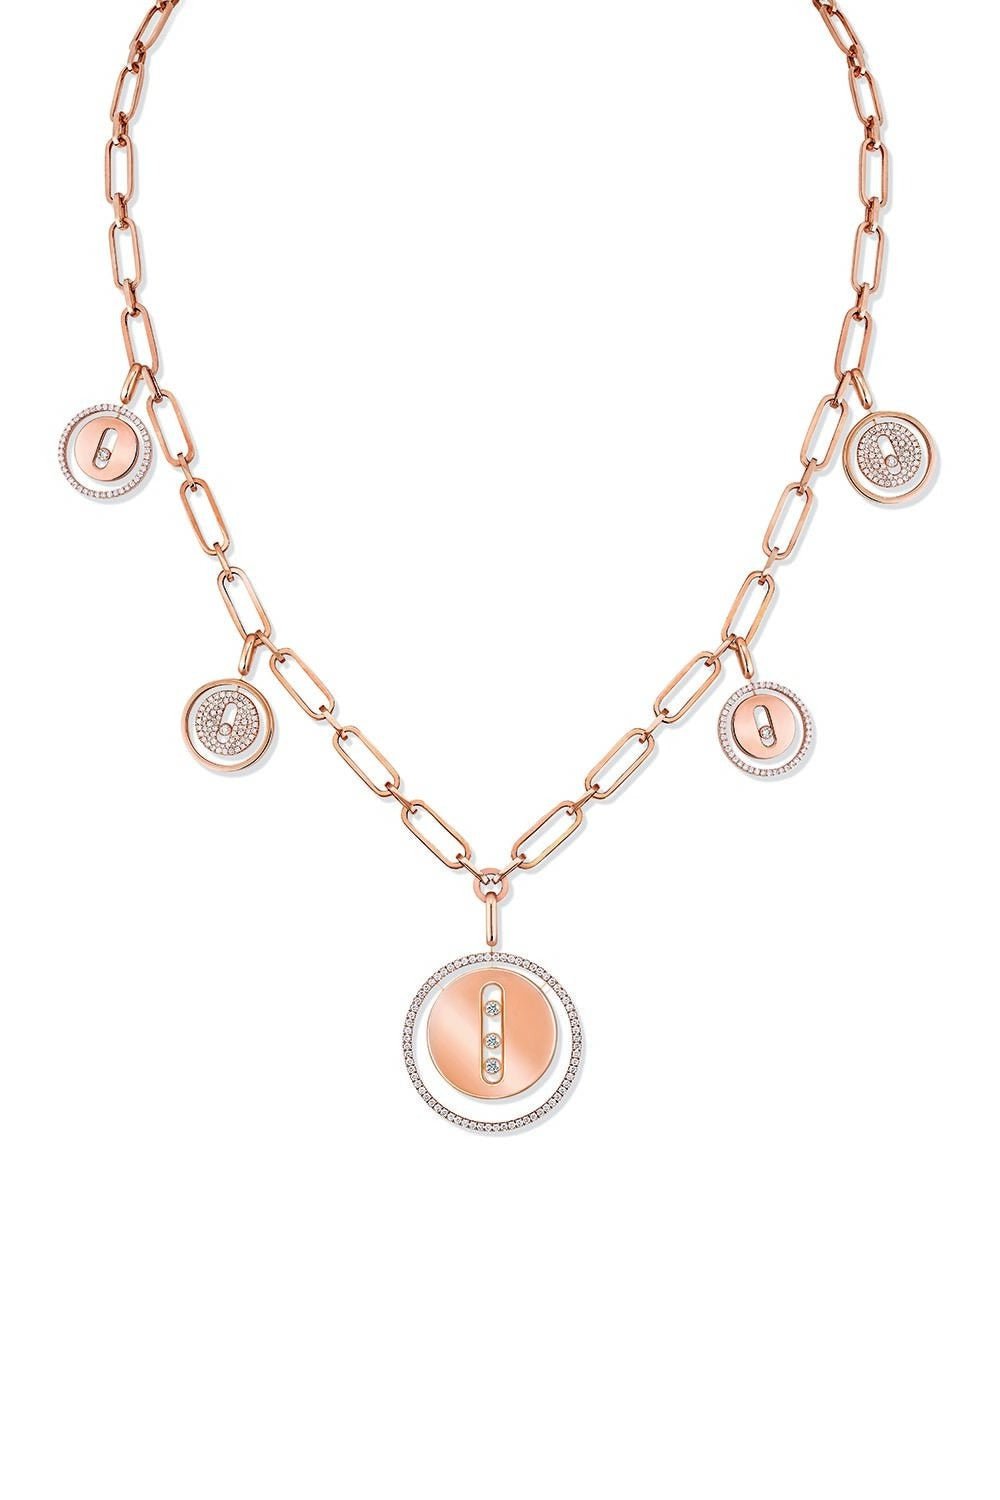 MESSIKA-Lucky Move Charm Necklace-ROSE GOLD